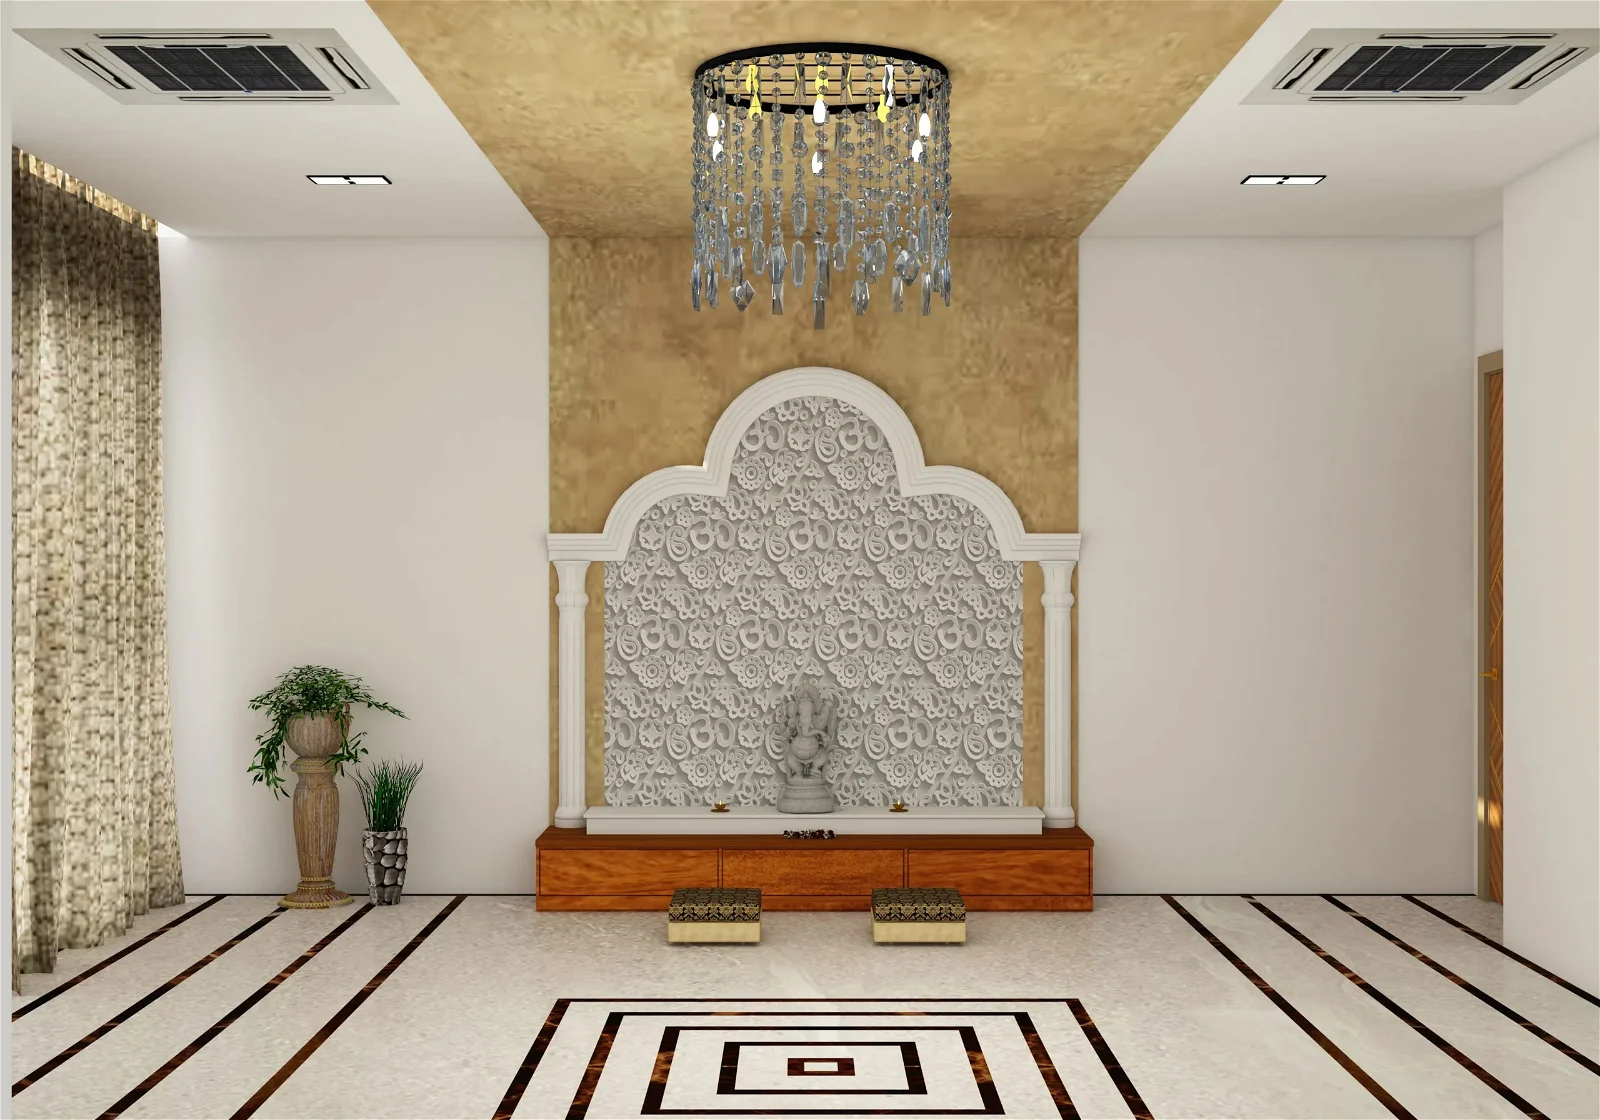 Interior designs for a temple designs with a chandelier hang in temple